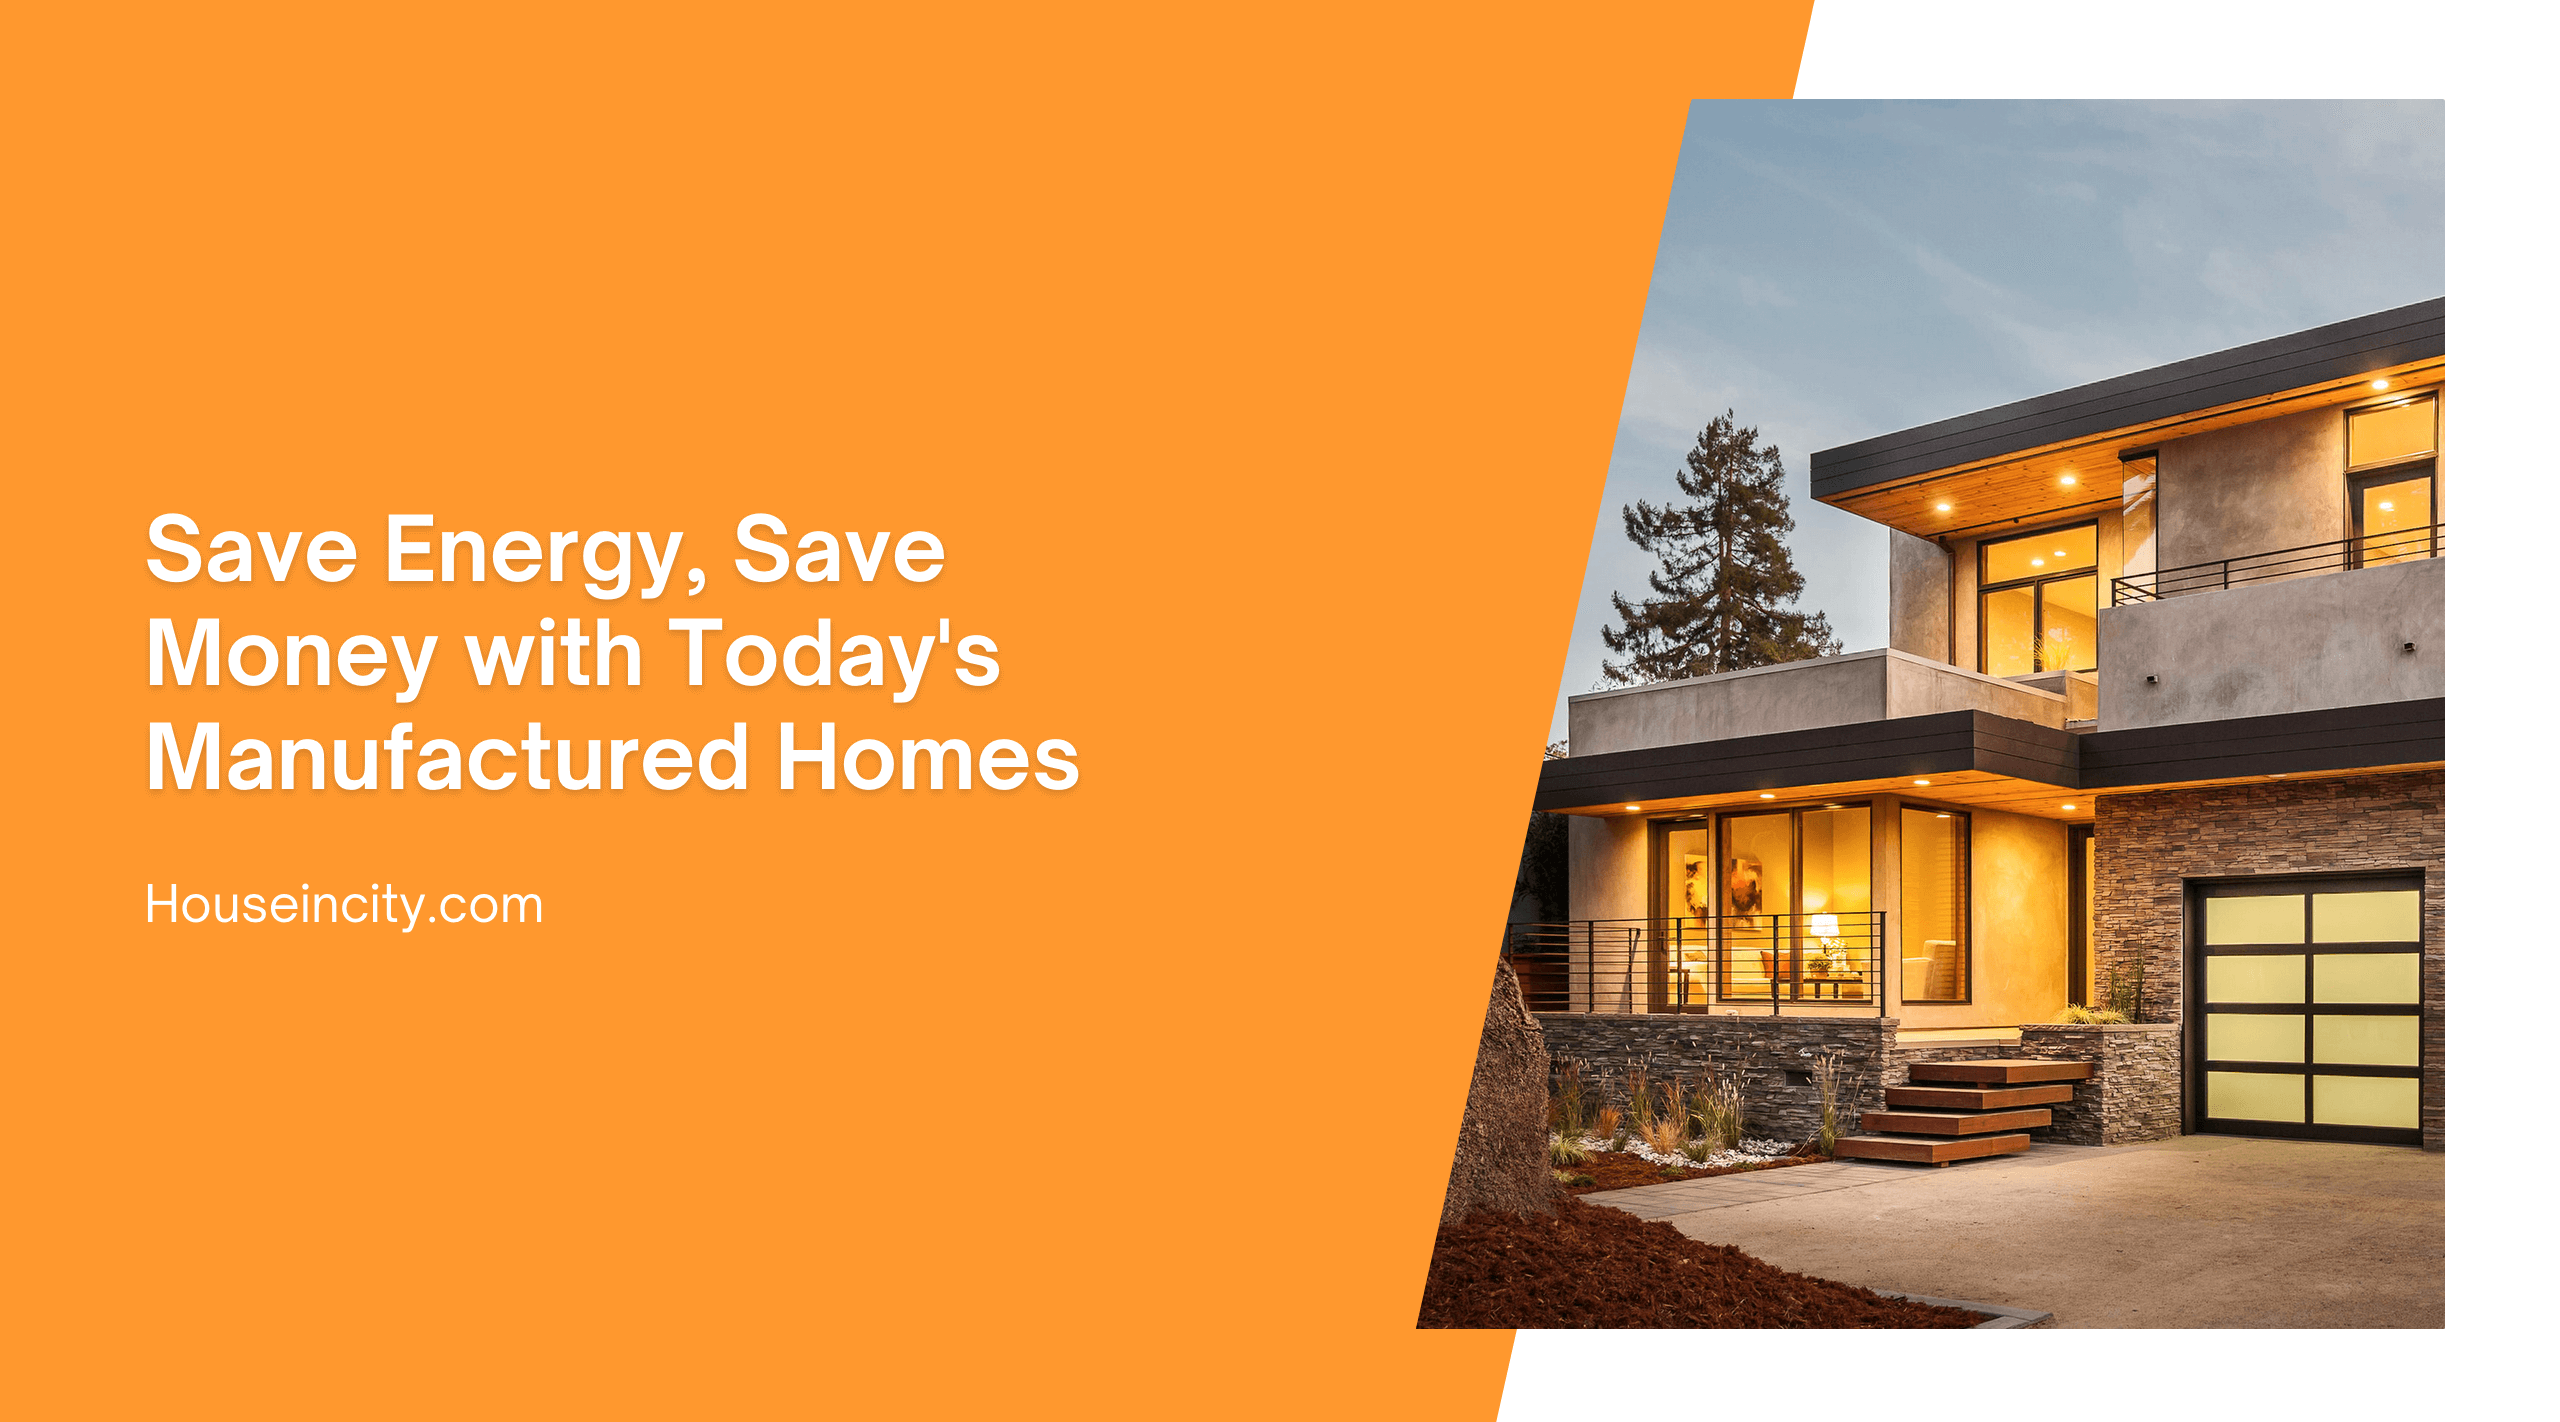 Save Energy, Save Money with Today's Manufactured Homes